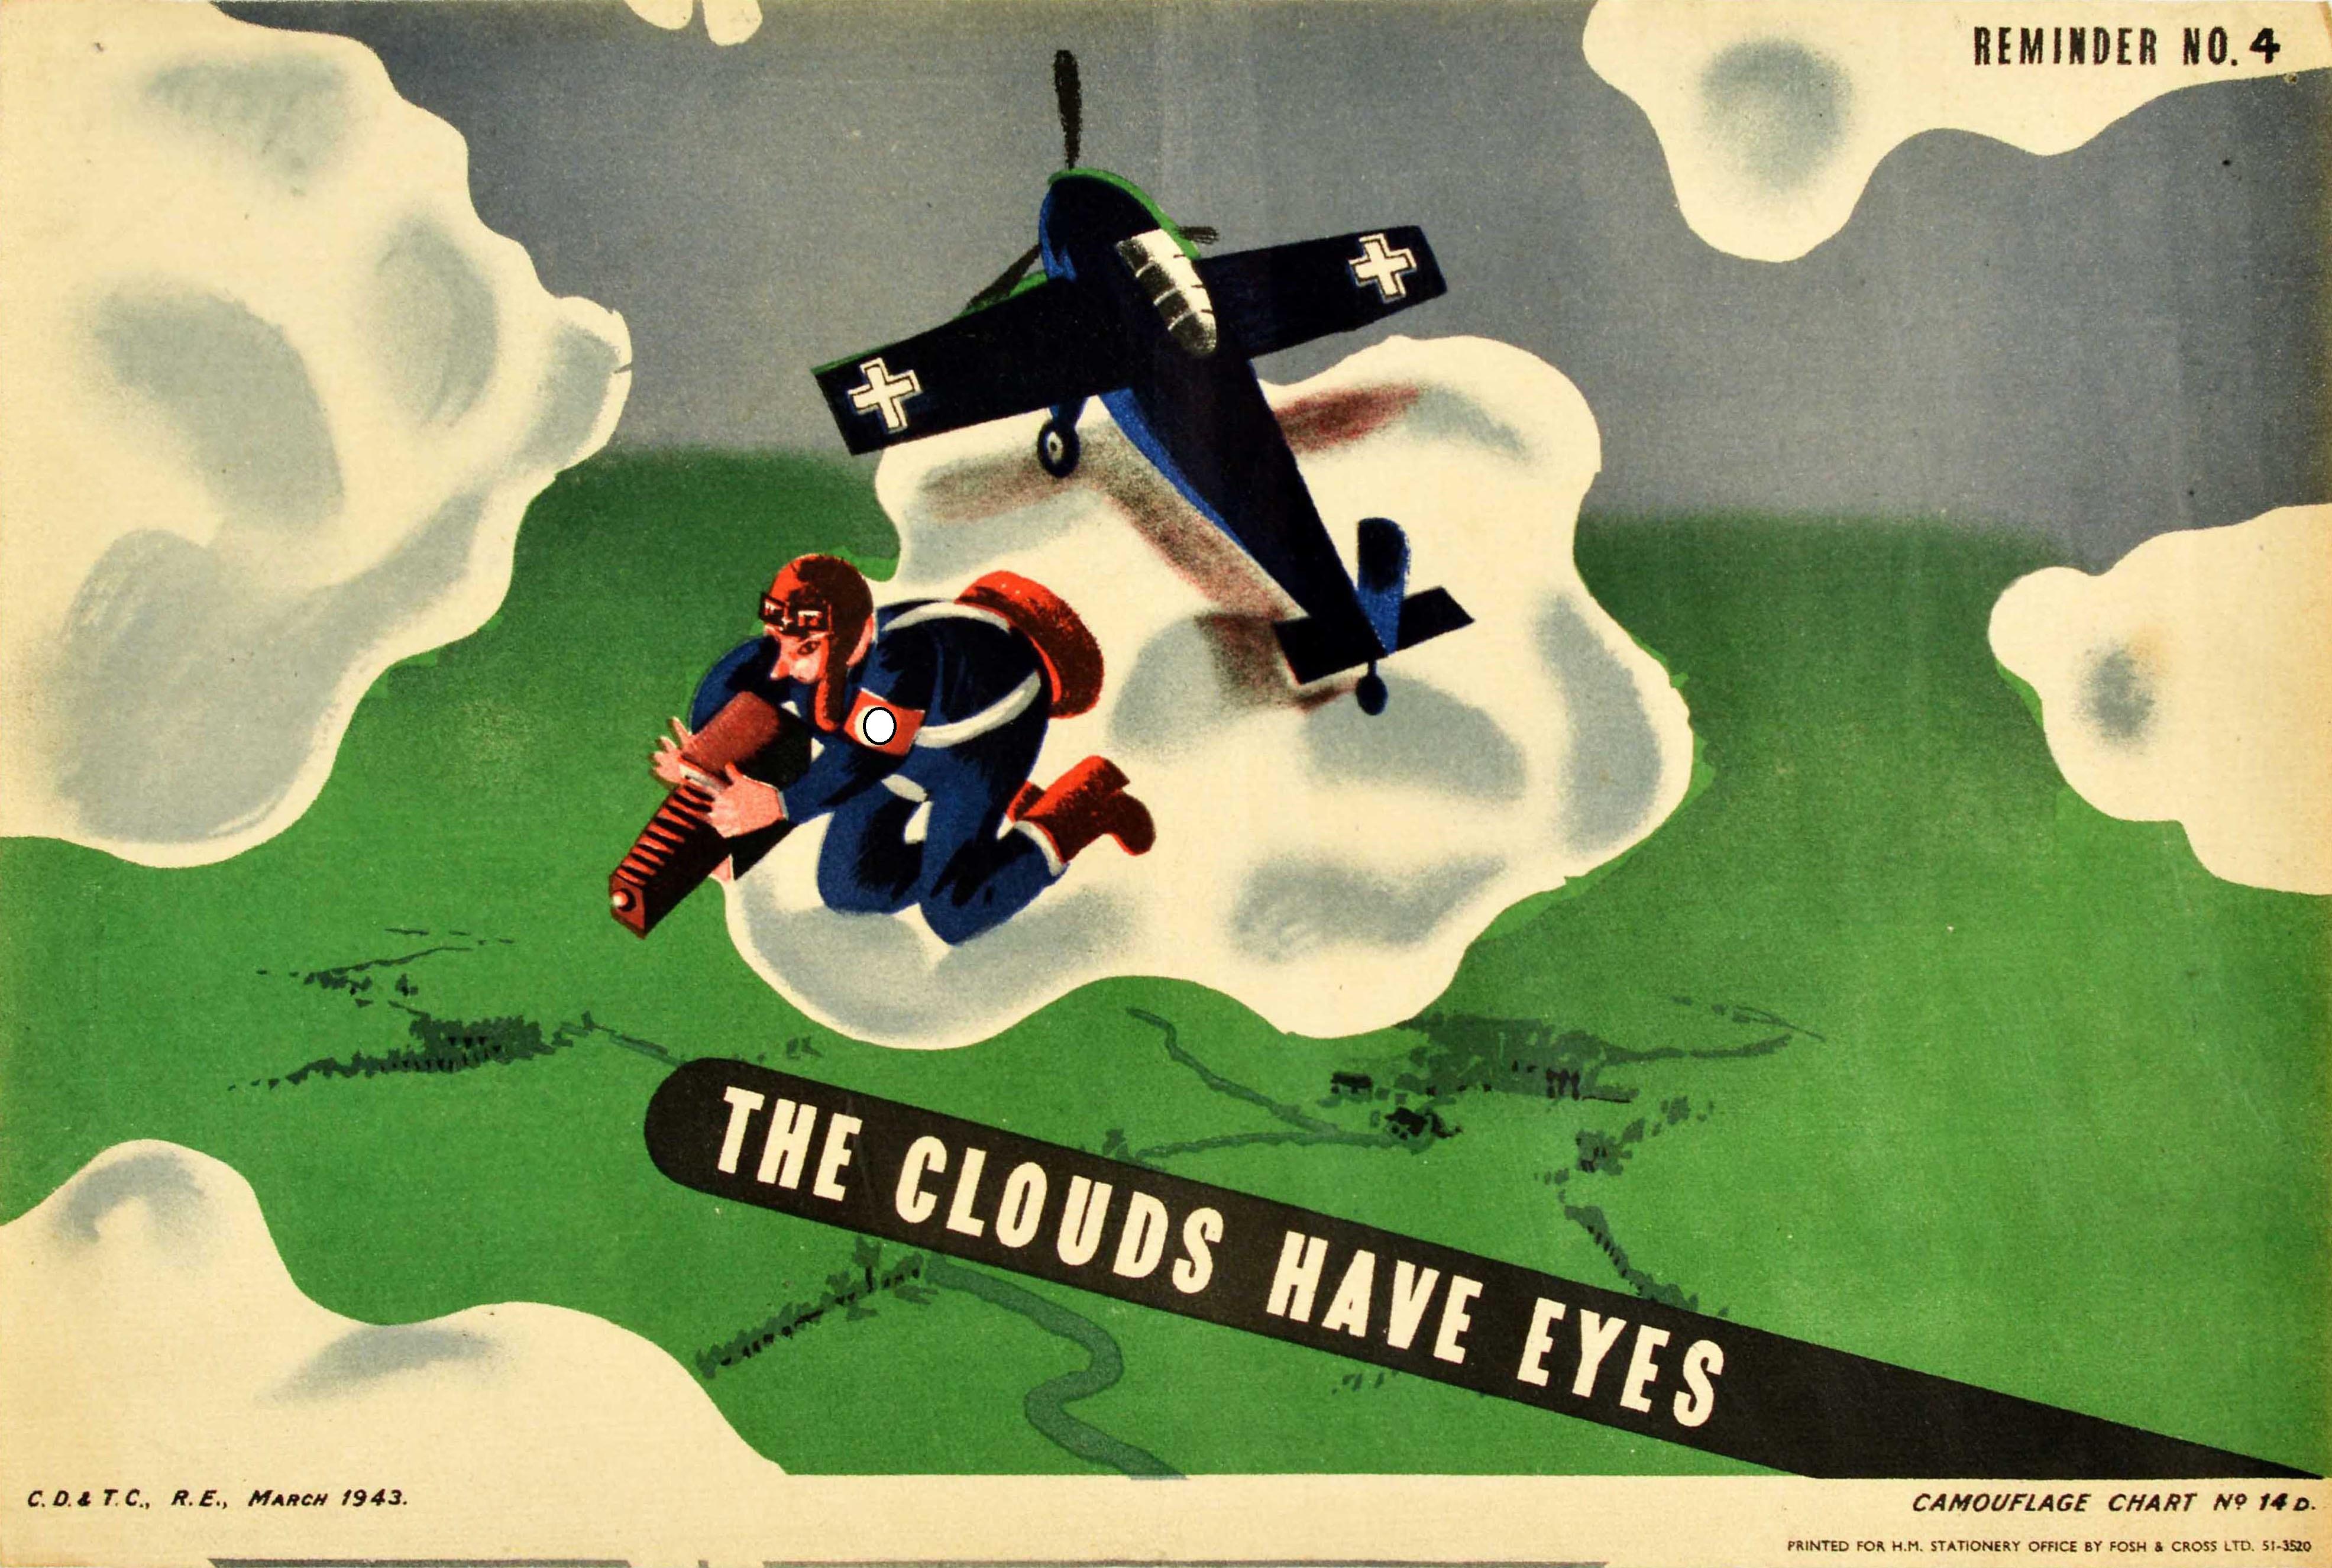 Unknown Print - Original Vintage WWII Poster The Clouds Have Eyes War Spy Pilot Camouflage Plane